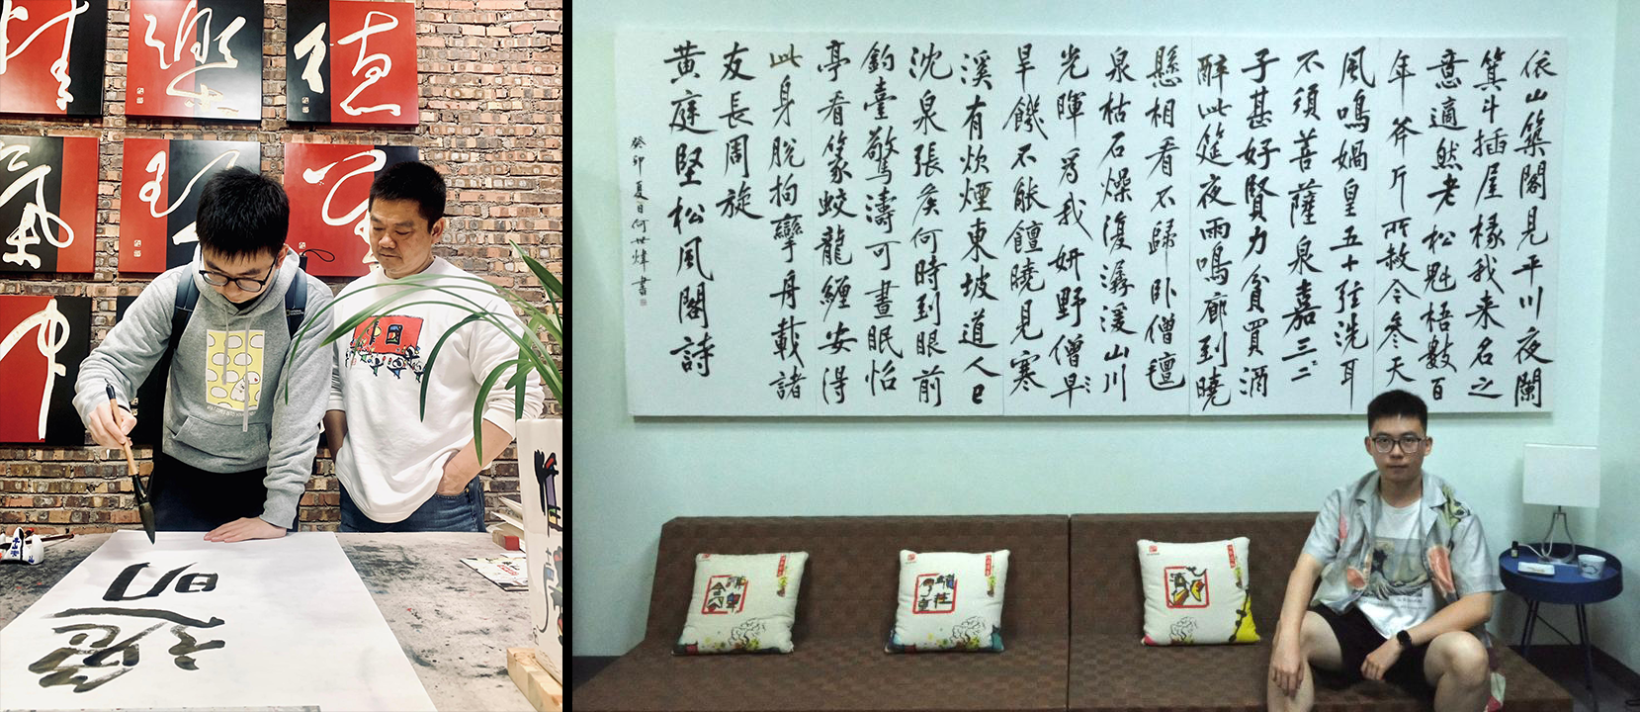 Under the guidance of his father, Master He Baijun, Shiwei copied Song Dynasty calligrapher Huang Tingjian’s “Poem on the Hall of Pines and Wind” in running script.